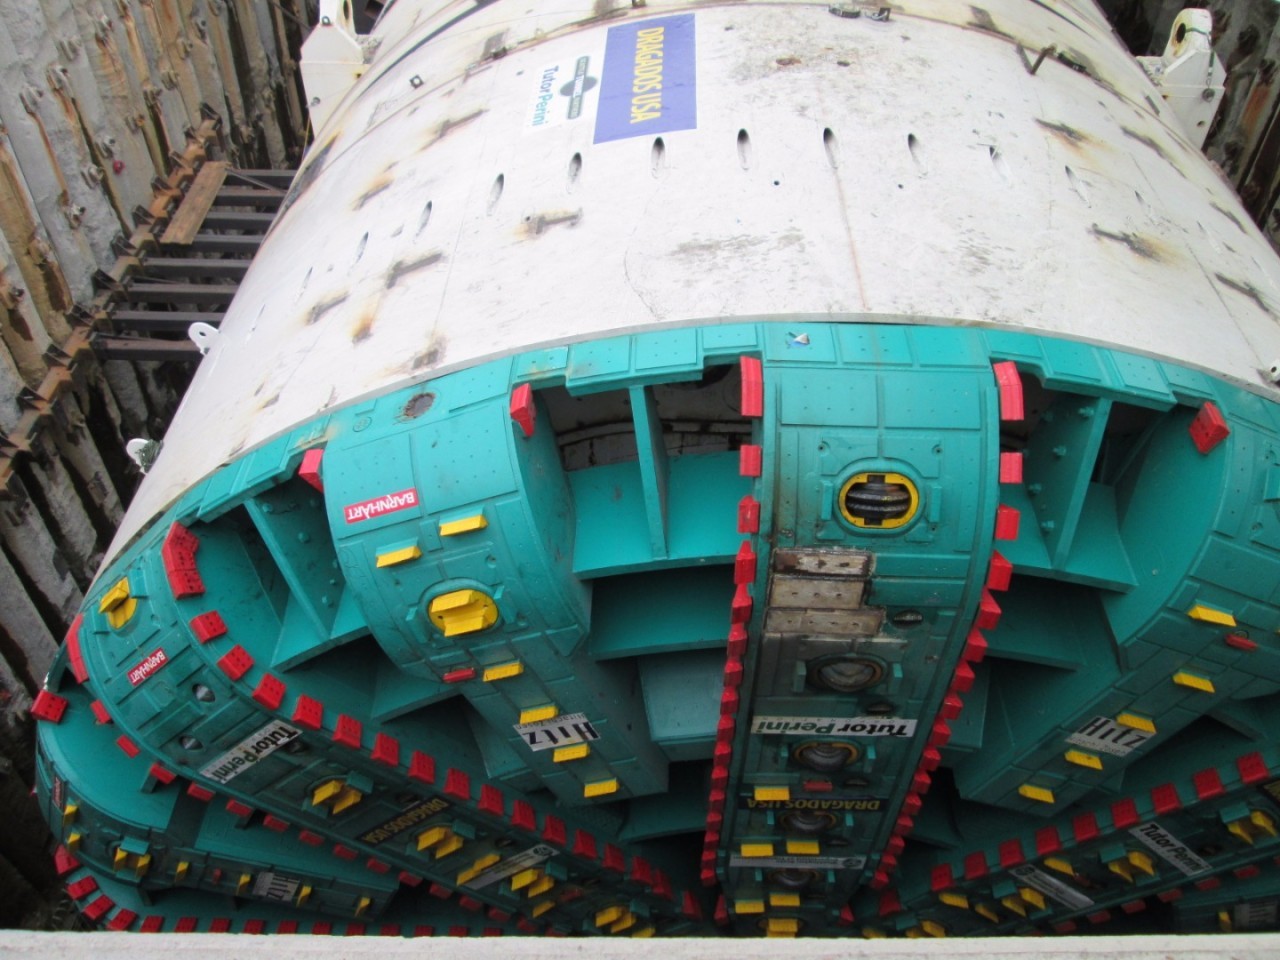 https://s1.cdn.autoevolution.com/images/news/gallery/big-bertha-a-25000-hp-mechanical-worm-designed-in-japan-for-american-drilling_4.jpg